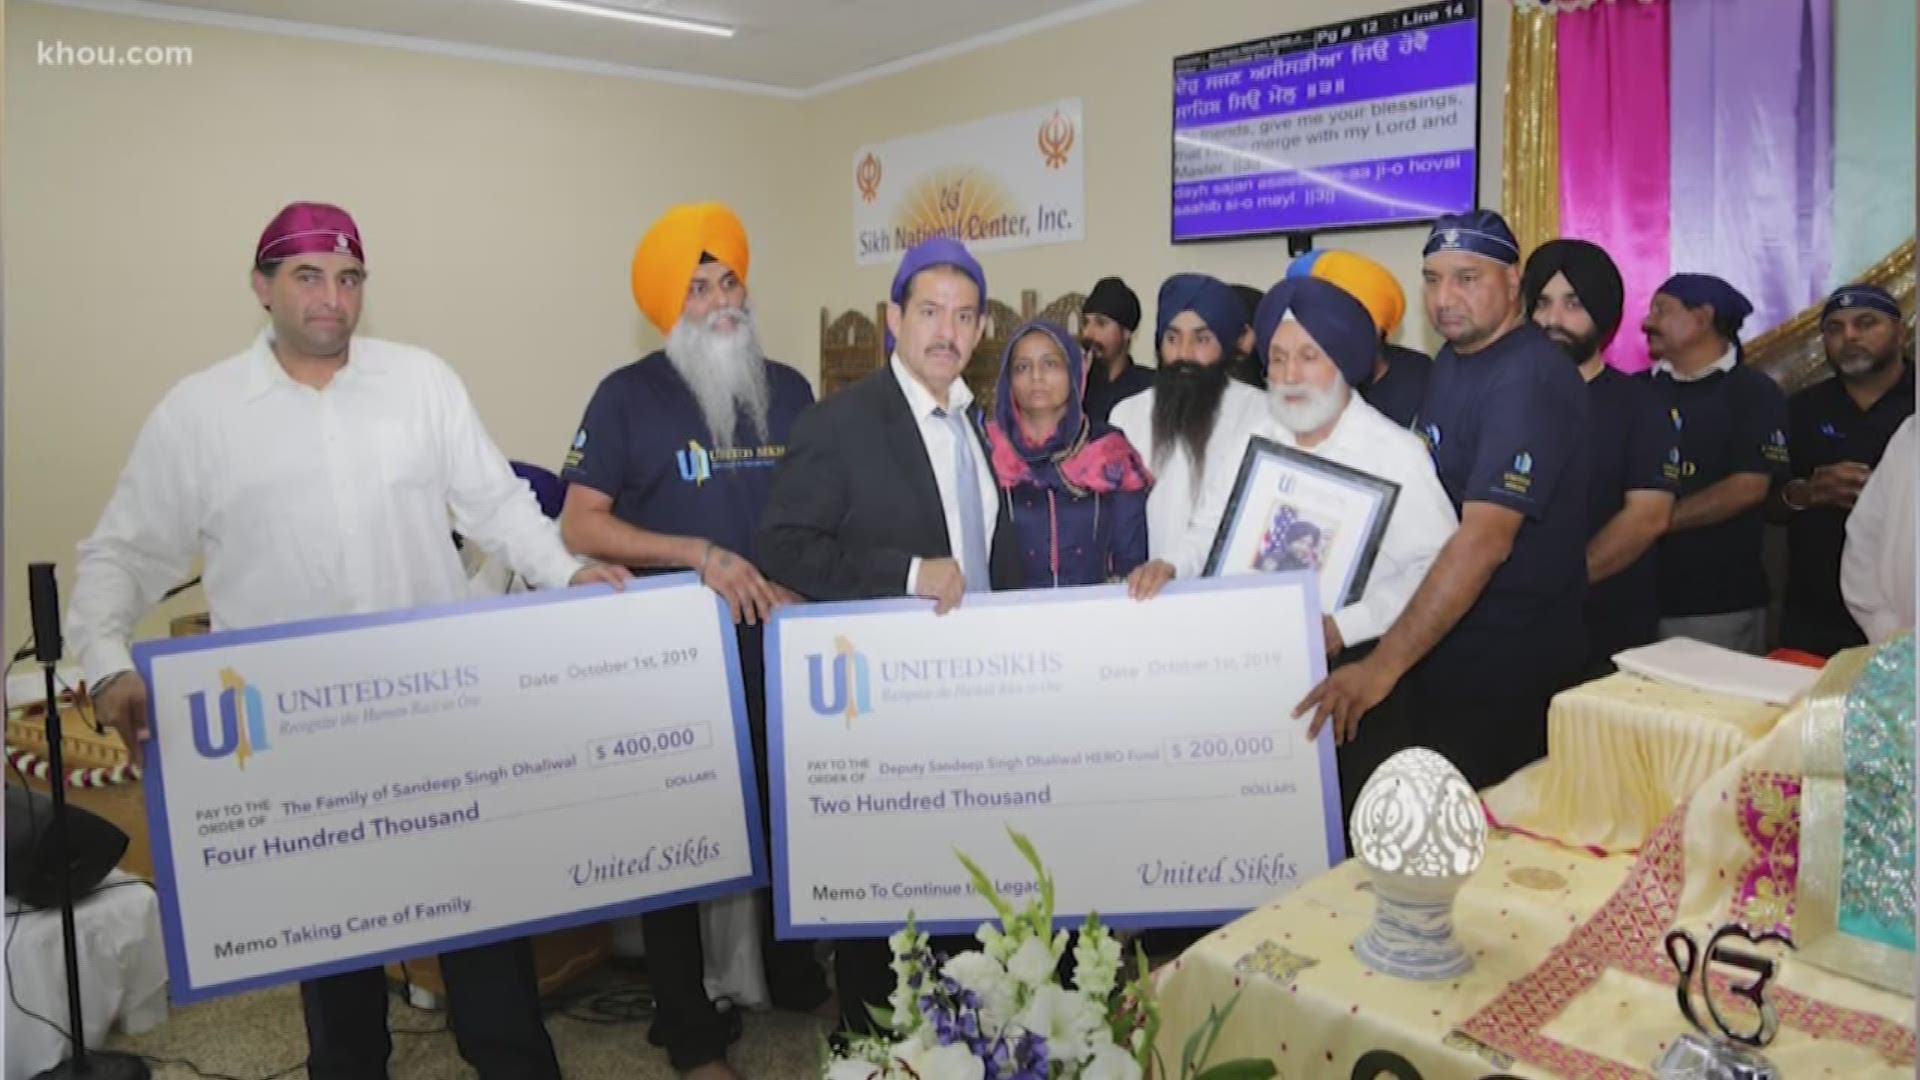 The United Sikhs presented falled deputy Sandeep Dhaliwal's family with a $600,000 check.